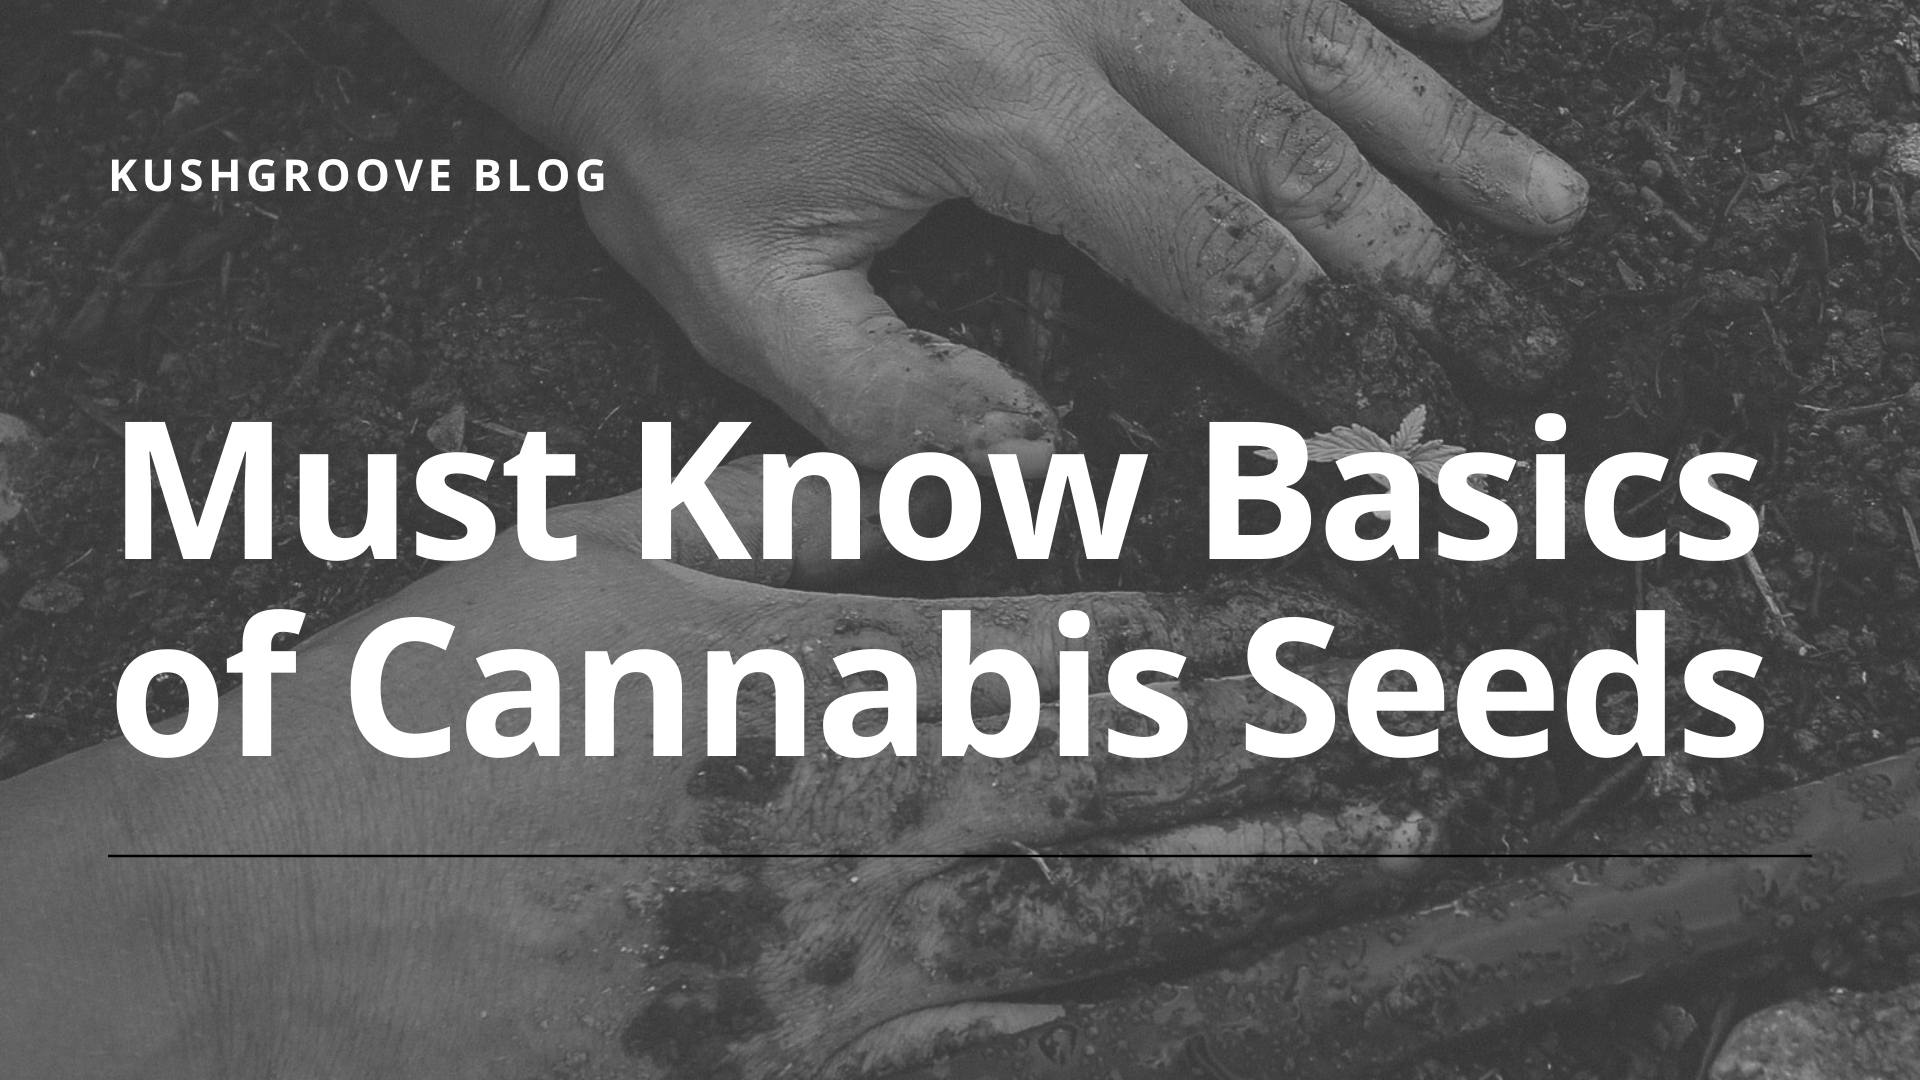 The Must-Know Basics About Cannabis Seeds